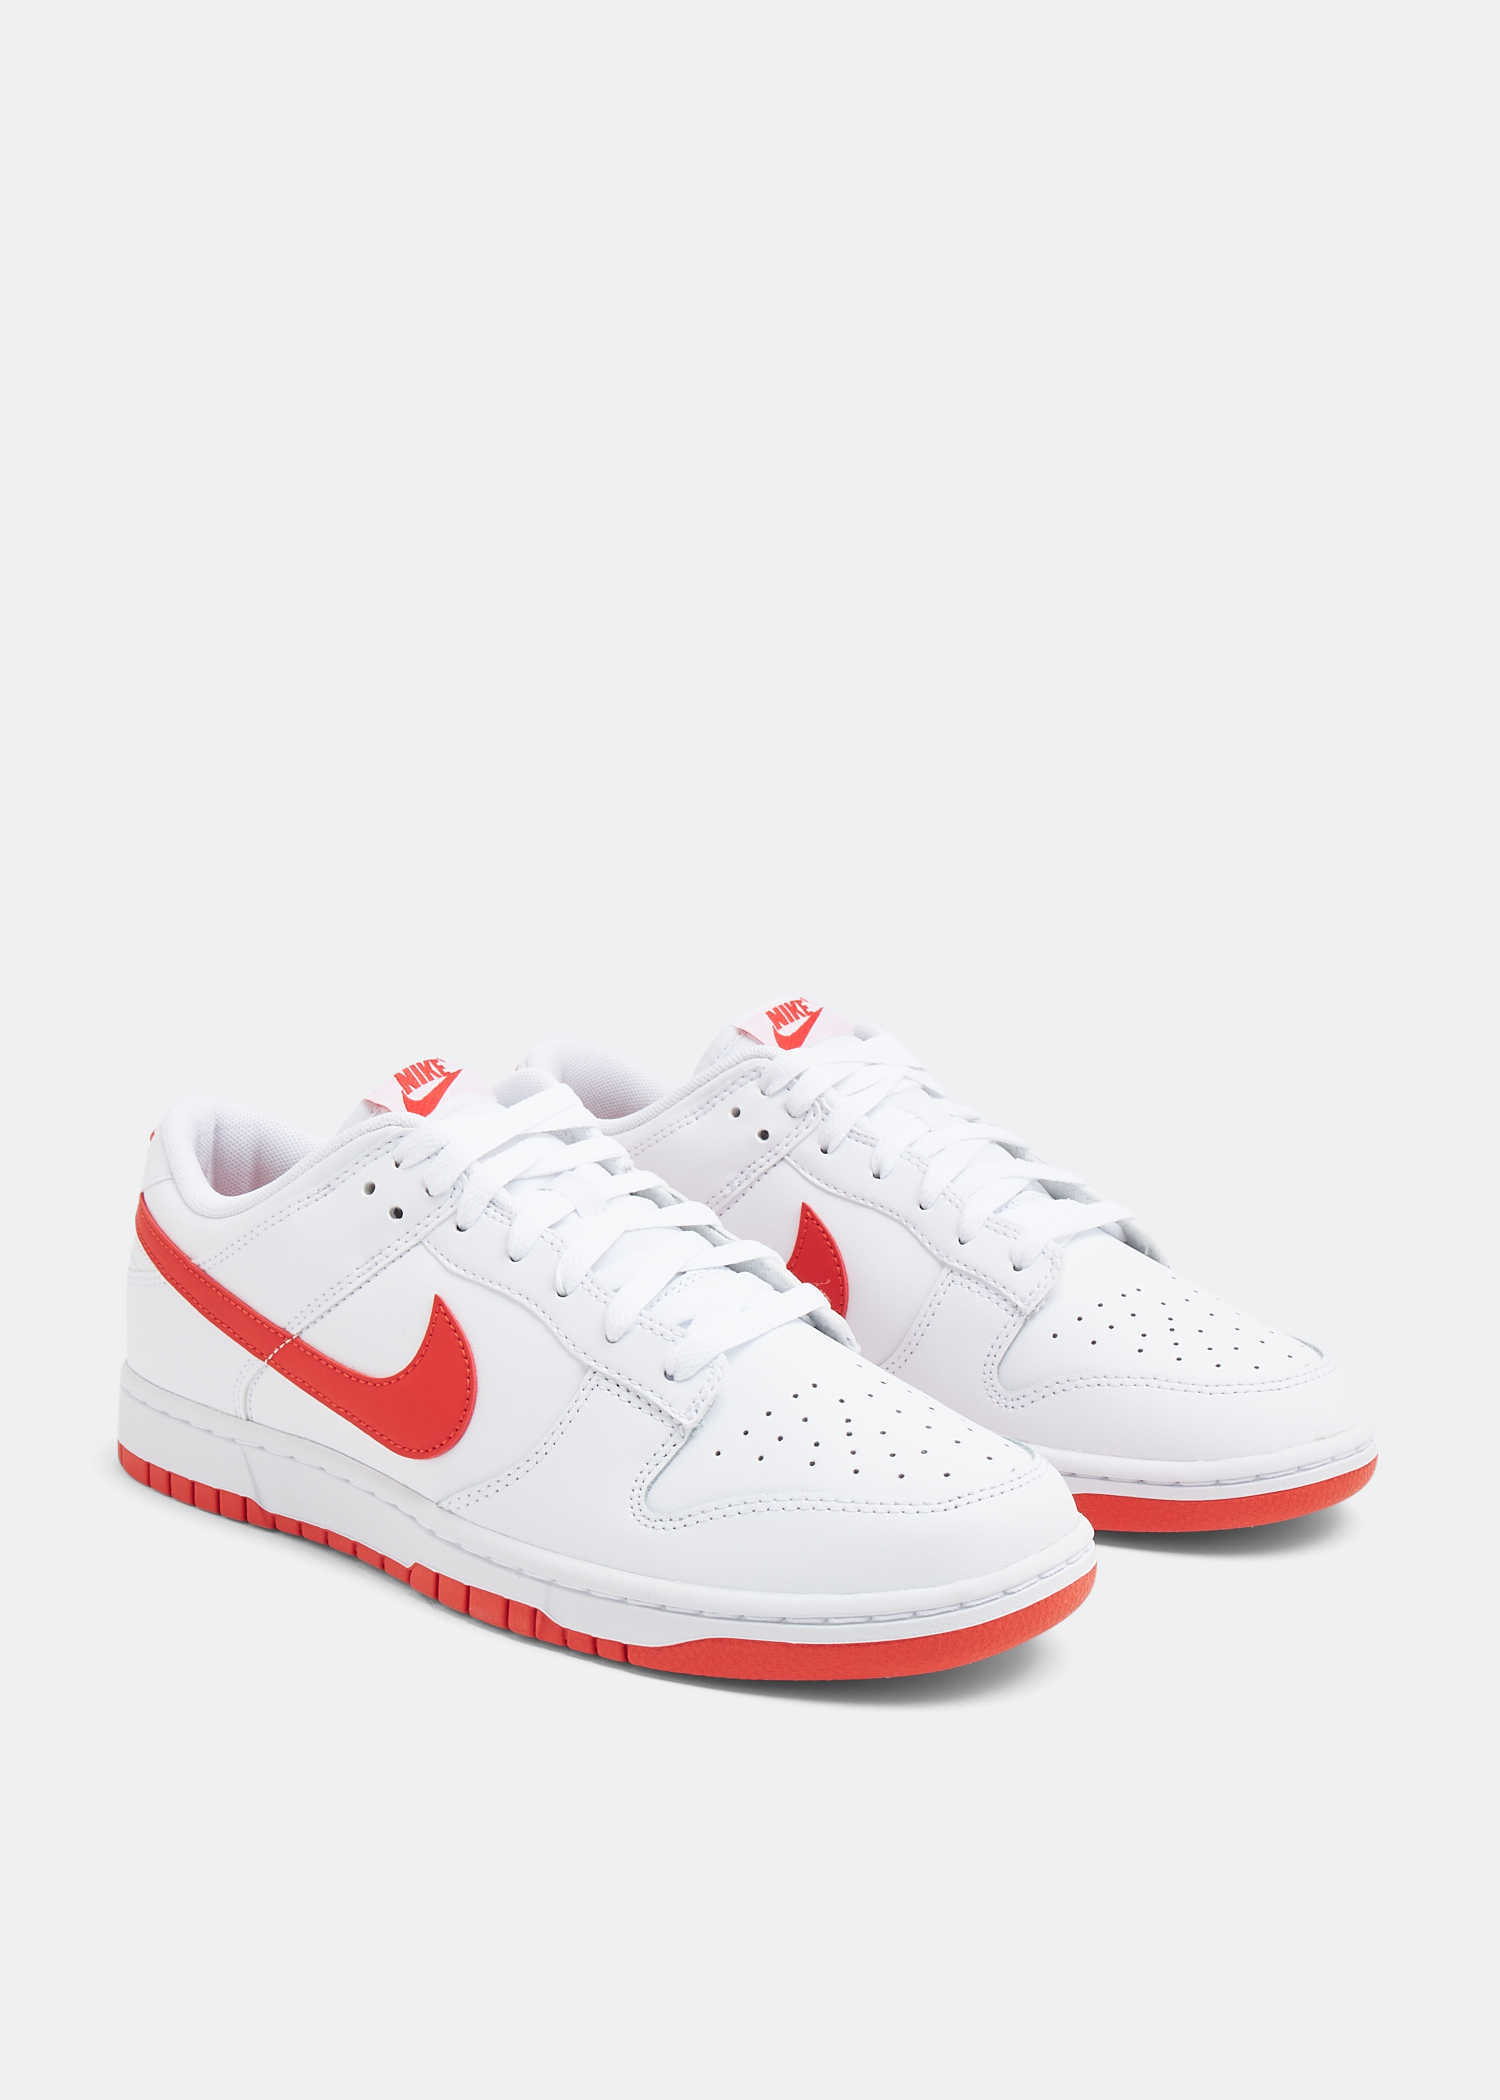 Nike Dunk Low 'Mystic Red' sneakers for Men - Red in UAE